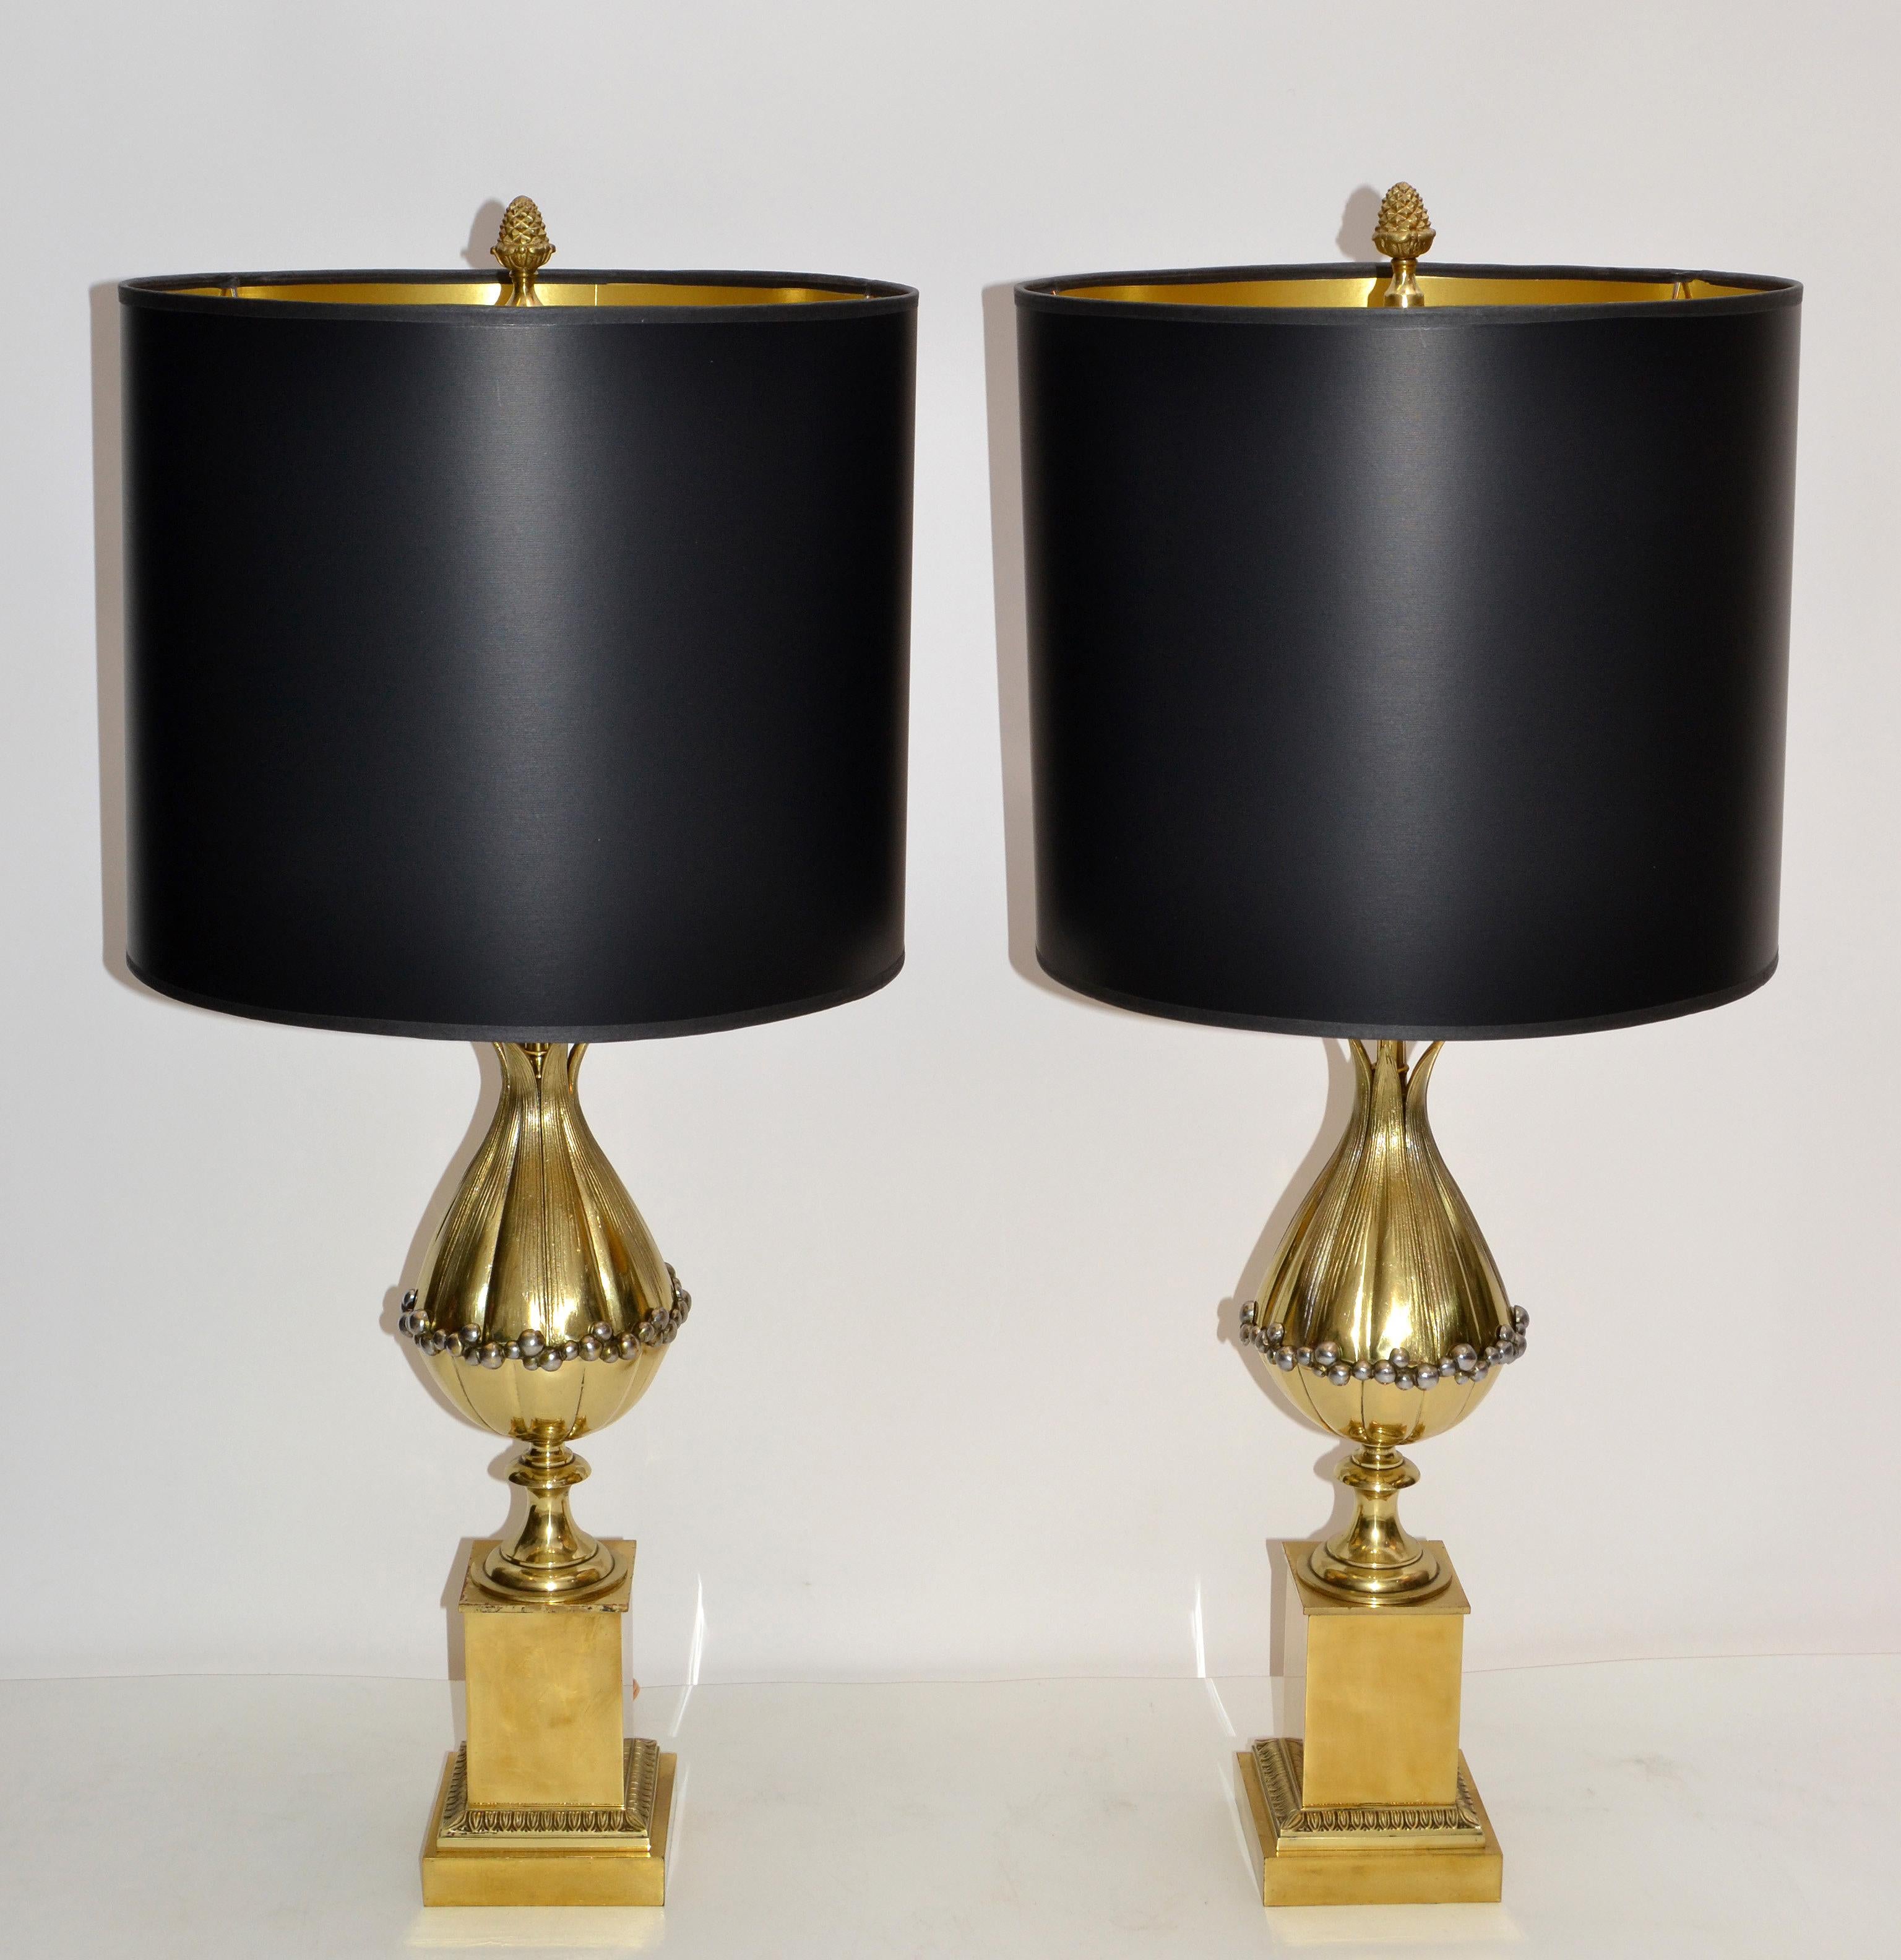 Maison Charles French Art Deco Lotus Bronze Table Lamp Black & Gold Shade, Pair For Sale 12